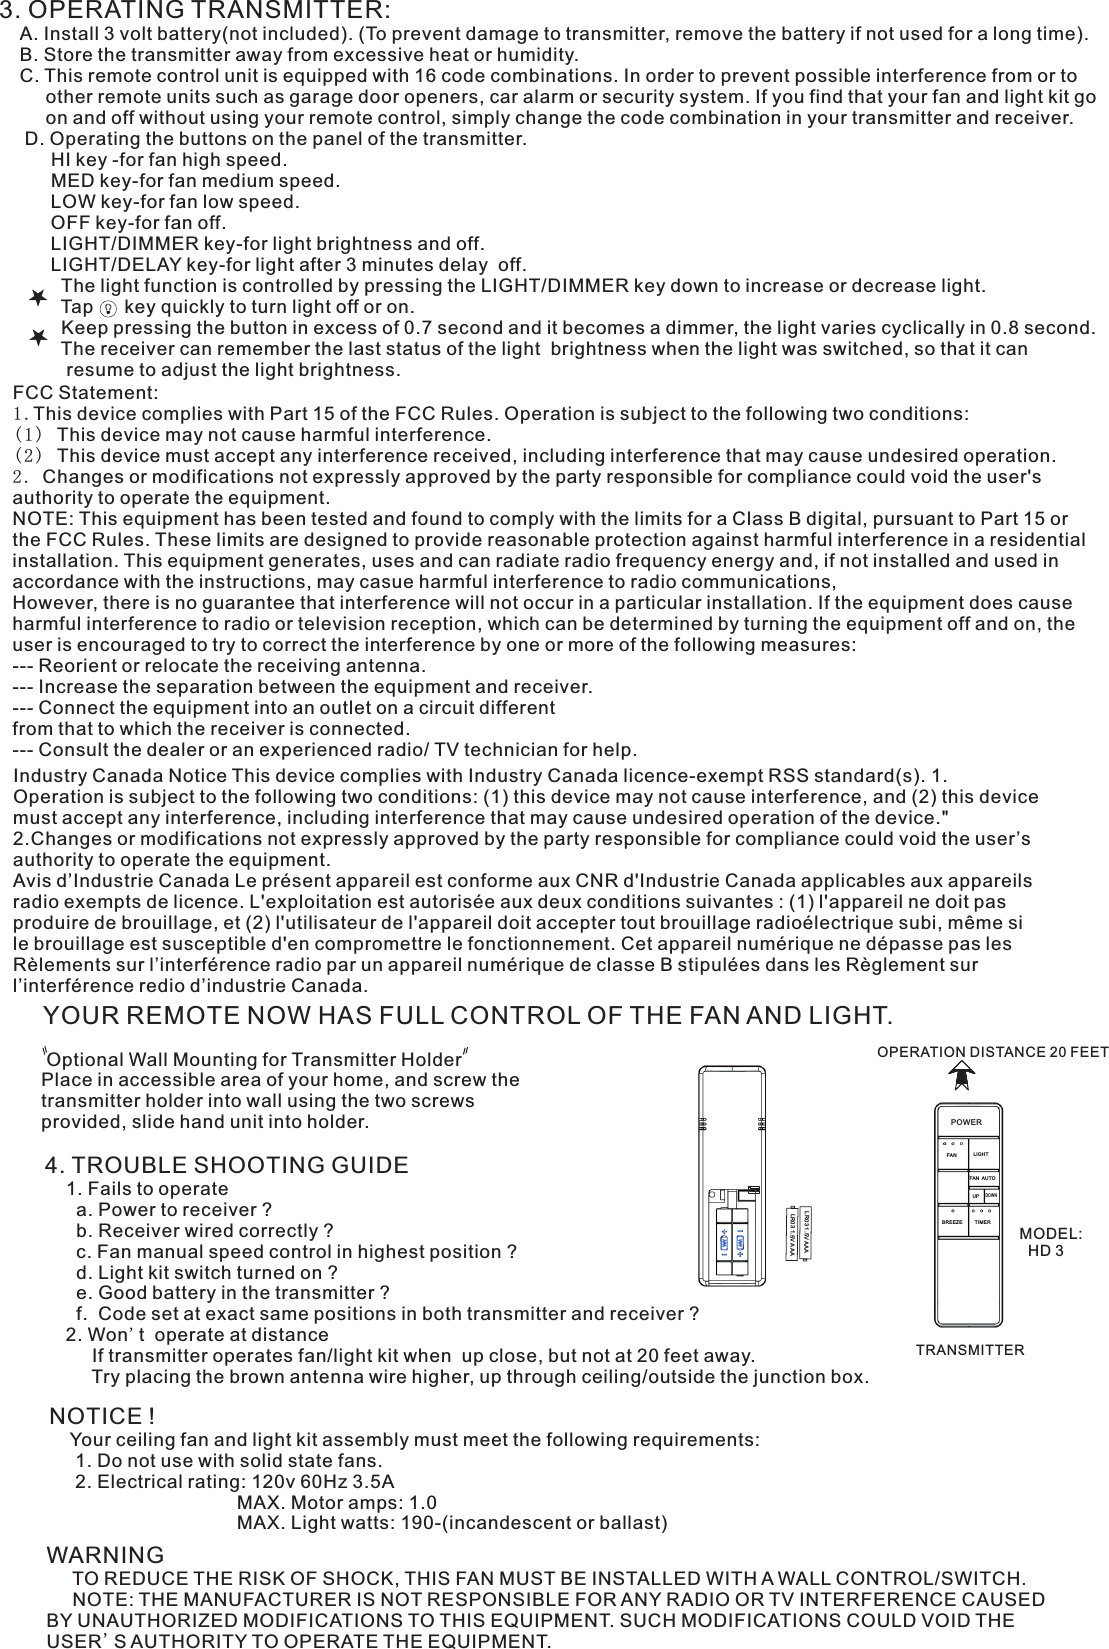 3. OPERATING TRANSMITTER:   A. Install 3 volt battery(not included). (To prevent damage to transmitter, remove the battery if not used for a long time).    B. Store the transmitter away from excessive heat or humidity.    C. This remote control unit is equipped with 16 code combinations. In order to prevent possible interference from or to          other remote units such as garage door openers, car alarm or security system. If you find that your fan and light kit go          on and off without using your remote control, simply change the code combination in your transmitter and receiver.      D. Operating the buttons on the panel of the transmitter.          HI key -for fan high speed.          MED key-for fan medium speed.          LOW key-for fan low speed.          OFF key-for fan off.          LIGHT/DIMMER key-for light brightness and off.          LIGHT/DELAY key-for light after 3 minutes delay  off.            The light function is controlled by pressing the LIGHT/DIMMER key down to increase or decrease light.            Tap      key quickly to turn light off or on.              Keep pressing the button in excess of 0.7 second and it becomes a dimmer, the light varies cyclically in 0.8 second.            The receiver can remember the last status of the light  brightness when the light was switched, so that it can              resume to adjust the light brightness.YOUR REMOTE NOW HAS FULL CONTROL OF THE FAN AND LIGHT. Optional Wall Mounting for Transmitter HolderPlace in accessible area of your home, and screw the transmitter holder into wall using the two screws provided, slide hand unit into holder.4. TROUBLE SHOOTING GUIDE    1. Fails to operate      a. Power to receiver ?      b. Receiver wired correctly ?      c. Fan manual speed control in highest position ?      d. Light kit switch turned on ?      e. Good battery in the transmitter ?      f.  Code set at exact same positions in both transmitter and receiver ?    2. Won&apos;t  operate at distance         If transmitter operates fan/light kit when  up close, but not at 20 feet away.         Try placing the brown antenna wire higher, up through ceiling/outside the junction box.NOTICE !    Your ceiling fan and light kit assembly must meet the following requirements:     1. Do not use with solid state fans.     2. Electrical rating: 120v 60Hz 3.5A                                    MAX. Motor amps: 1.0                                    MAX. Light watts: 190-(incandescent or ballast)WARNING     TO REDUCE THE RISK OF SHOCK, THIS FAN MUST BE INSTALLED WITH A WALL CONTROL/SWITCH.     NOTE: THE MANUFACTURER IS NOT RESPONSIBLE FOR ANY RADIO OR TV INTERFERENCE CAUSED BY UNAUTHORIZED MODIFICATIONS TO THIS EQUIPMENT. SUCH MODIFICATIONS COULD VOID THE USER&apos;S AUTHORITY TO OPERATE THE EQUIPMENT.OPERATION DISTANCE 20 FEETTRANSMITTERMODEL:   HD 3LR03 1.5V AAALR03 1.5V AAAIndustry Canada Notice This device complies with Industry Canada licence-exempt RSS standard(s). 1. Operation is subject to the following two conditions: (1) this device may not cause interference, and (2) this device must accept any interference, including interference that may cause undesired operation of the device.&quot; 2.Changes or modifications not expressly approved by the party responsible for compliance could void the user’s authority to operate the equipment.Avis d’Industrie Canada Le présent appareil est conforme aux CNR d&apos;Industrie Canada applicables aux appareils radio exempts de licence. L&apos;exploitation est autorisée aux deux conditions suivantes : (1) l&apos;appareil ne doit pas produire de brouillage, et (2) l&apos;utilisateur de l&apos;appareil doit accepter tout brouillage radioélectrique subi, même si le brouillage est susceptible d&apos;en compromettre le fonctionnement. Cet appareil numérique ne dépasse pas les Rèlements sur l’interférence radio par un appareil numérique de classe B stipulées dans les Règlement sur l’interférence redio d’industrie Canada.ON1  2  3  4POWERLIGHTFANFAN AUTOBREEZE TIMERUPDOWNFCC Statement: 1.This device complies with Part 15 of the FCC Rules. Operation is subject to the following two conditions:(1) This device may not cause harmful interference.(2) This device must accept any interference received, including interference that may cause undesired operation.2. Changes or modifications not expressly approved by the party responsible for compliance could void the user&apos;s authority to operate the equipment.NOTE: This equipment has been tested and found to comply with the limits for a Class B digital, pursuant to Part 15 or the FCC Rules. These limits are designed to provide reasonable protection against harmful interference in a residential installation. This equipment generates, uses and can radiate radio frequency energy and, if not installed and used in accordance with the instructions, may casue harmful interference to radio communications,However, there is no guarantee that interference will not occur in a particular installation. If the equipment does cause harmful interference to radio or television reception, which can be determined by turning the equipment off and on, the user is encouraged to try to correct the interference by one or more of the following measures:--- Reorient or relocate the receiving antenna.--- Increase the separation between the equipment and receiver.--- Connect the equipment into an outlet on a circuit differentfrom that to which the receiver is connected.--- Consult the dealer or an experienced radio/ TV technician for help.